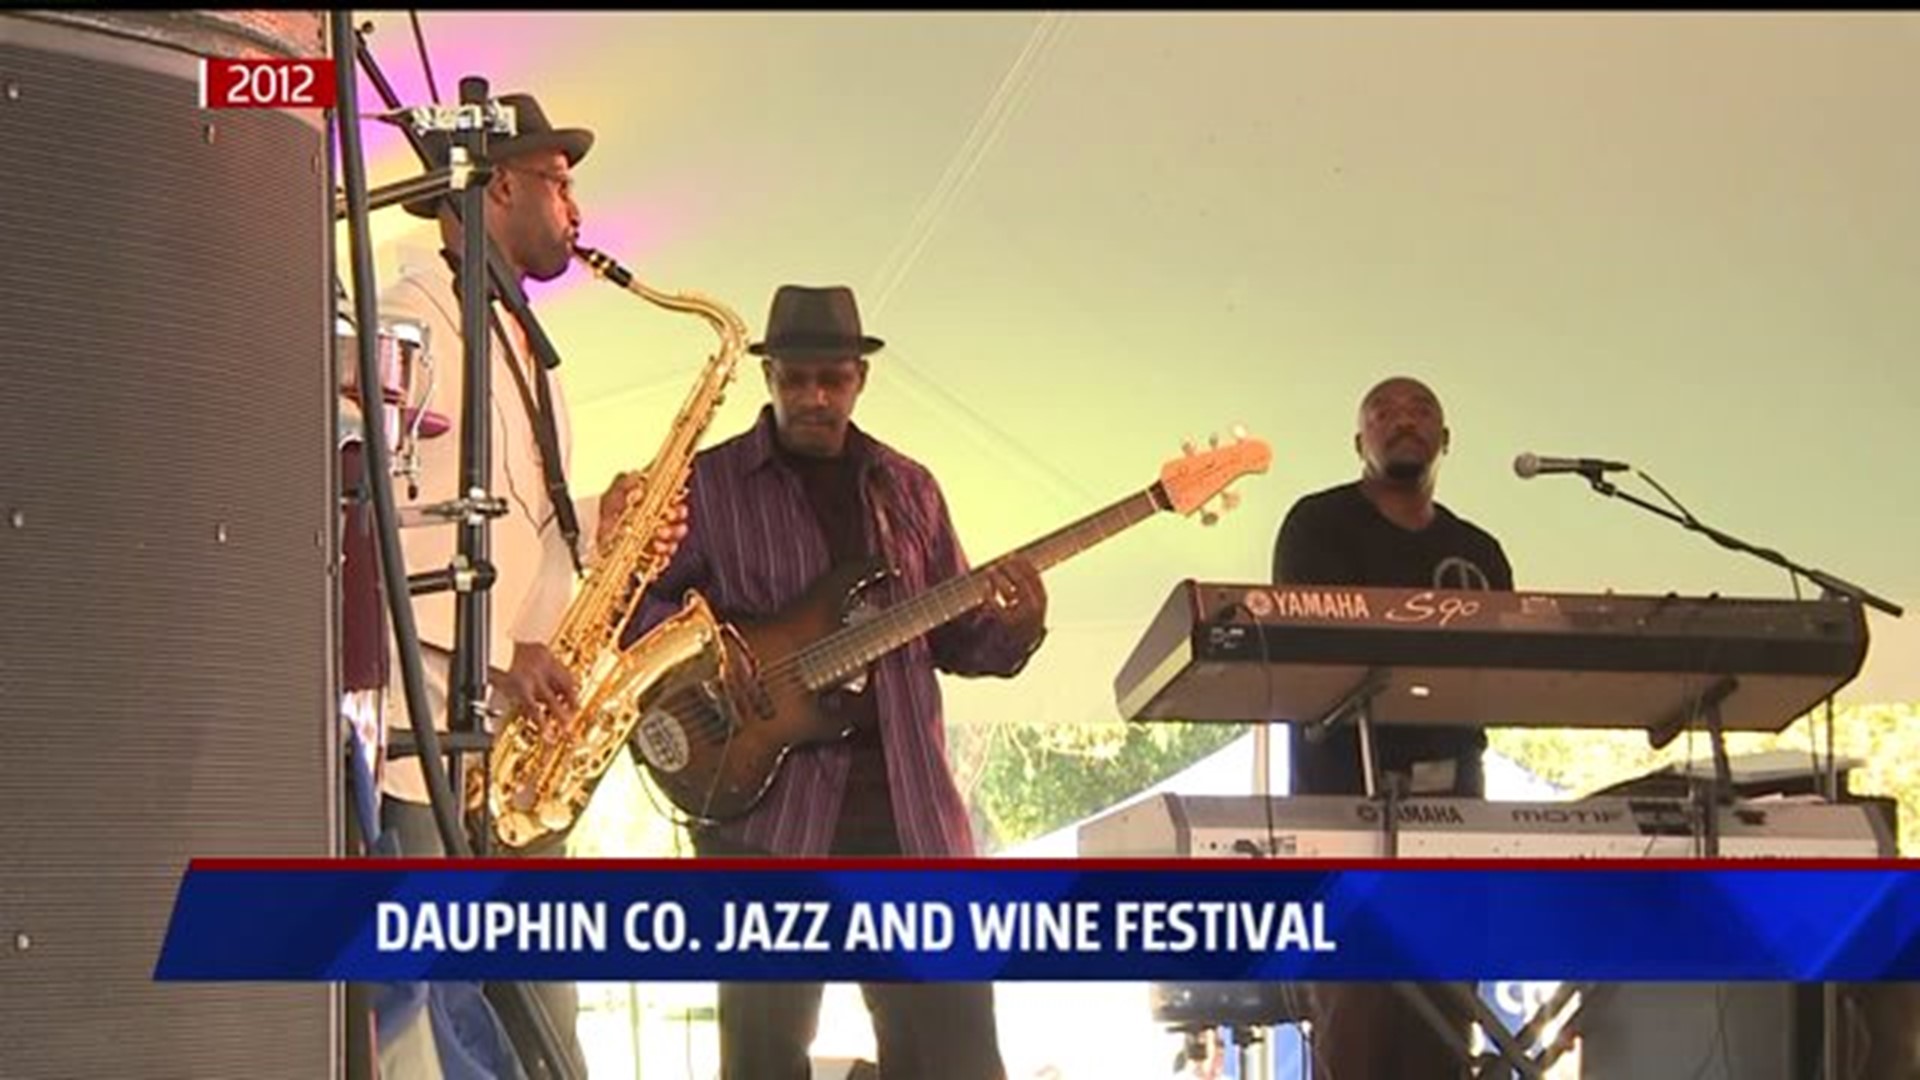 Getting ready for this year`s Jazz and Wine Festival at Fort Hunter Park in Dauphin County